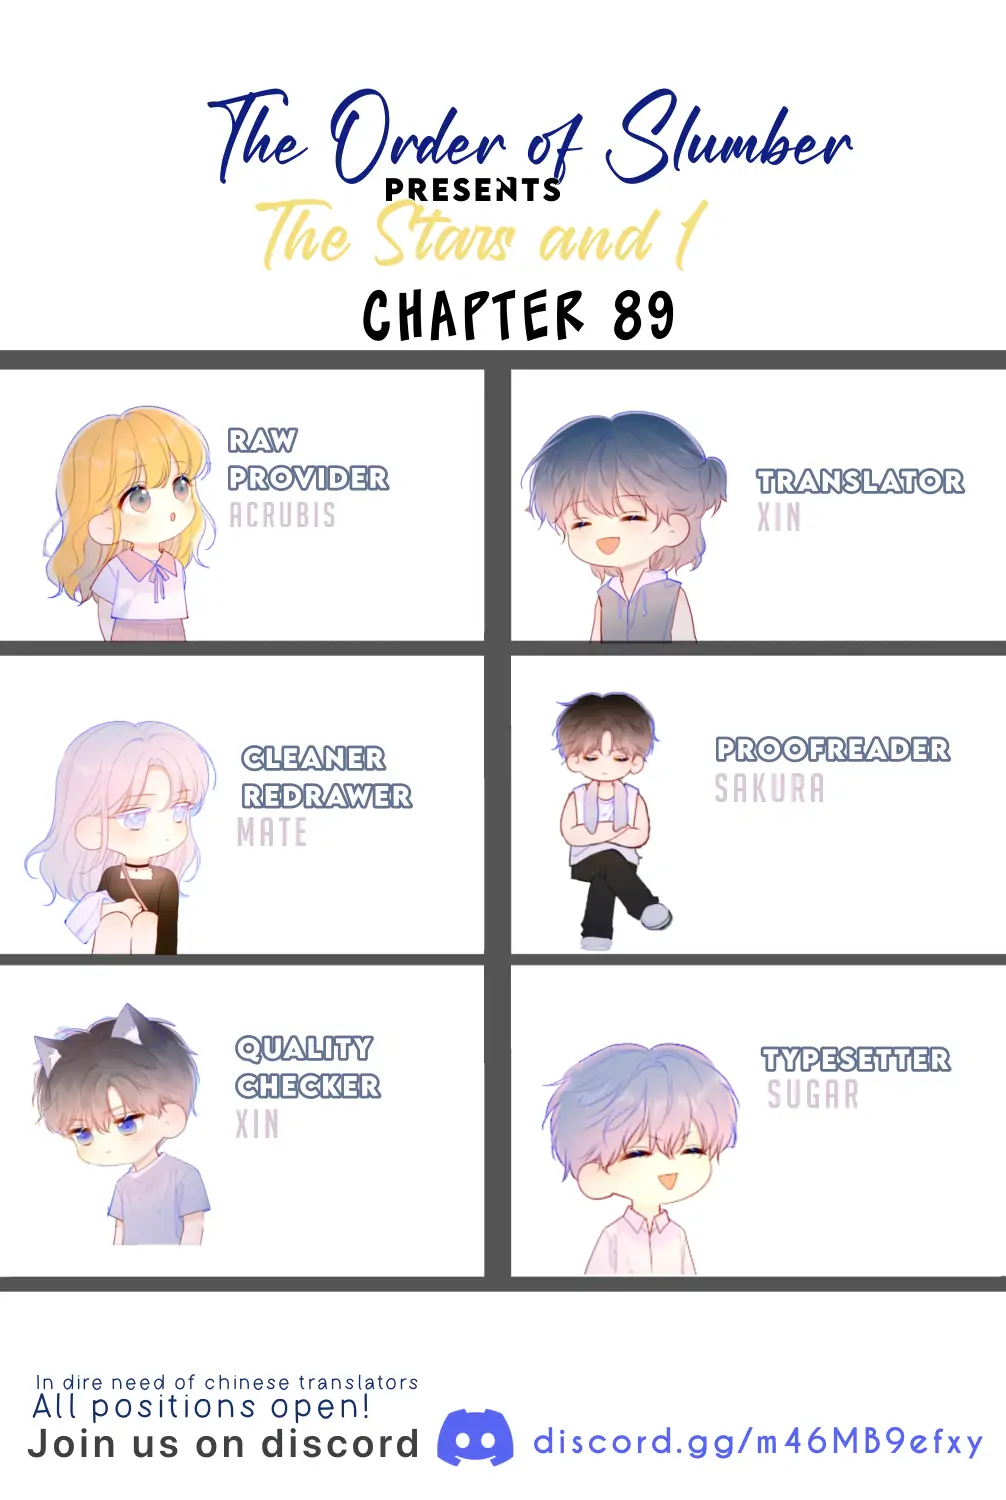 The Stars and I Chapter 89